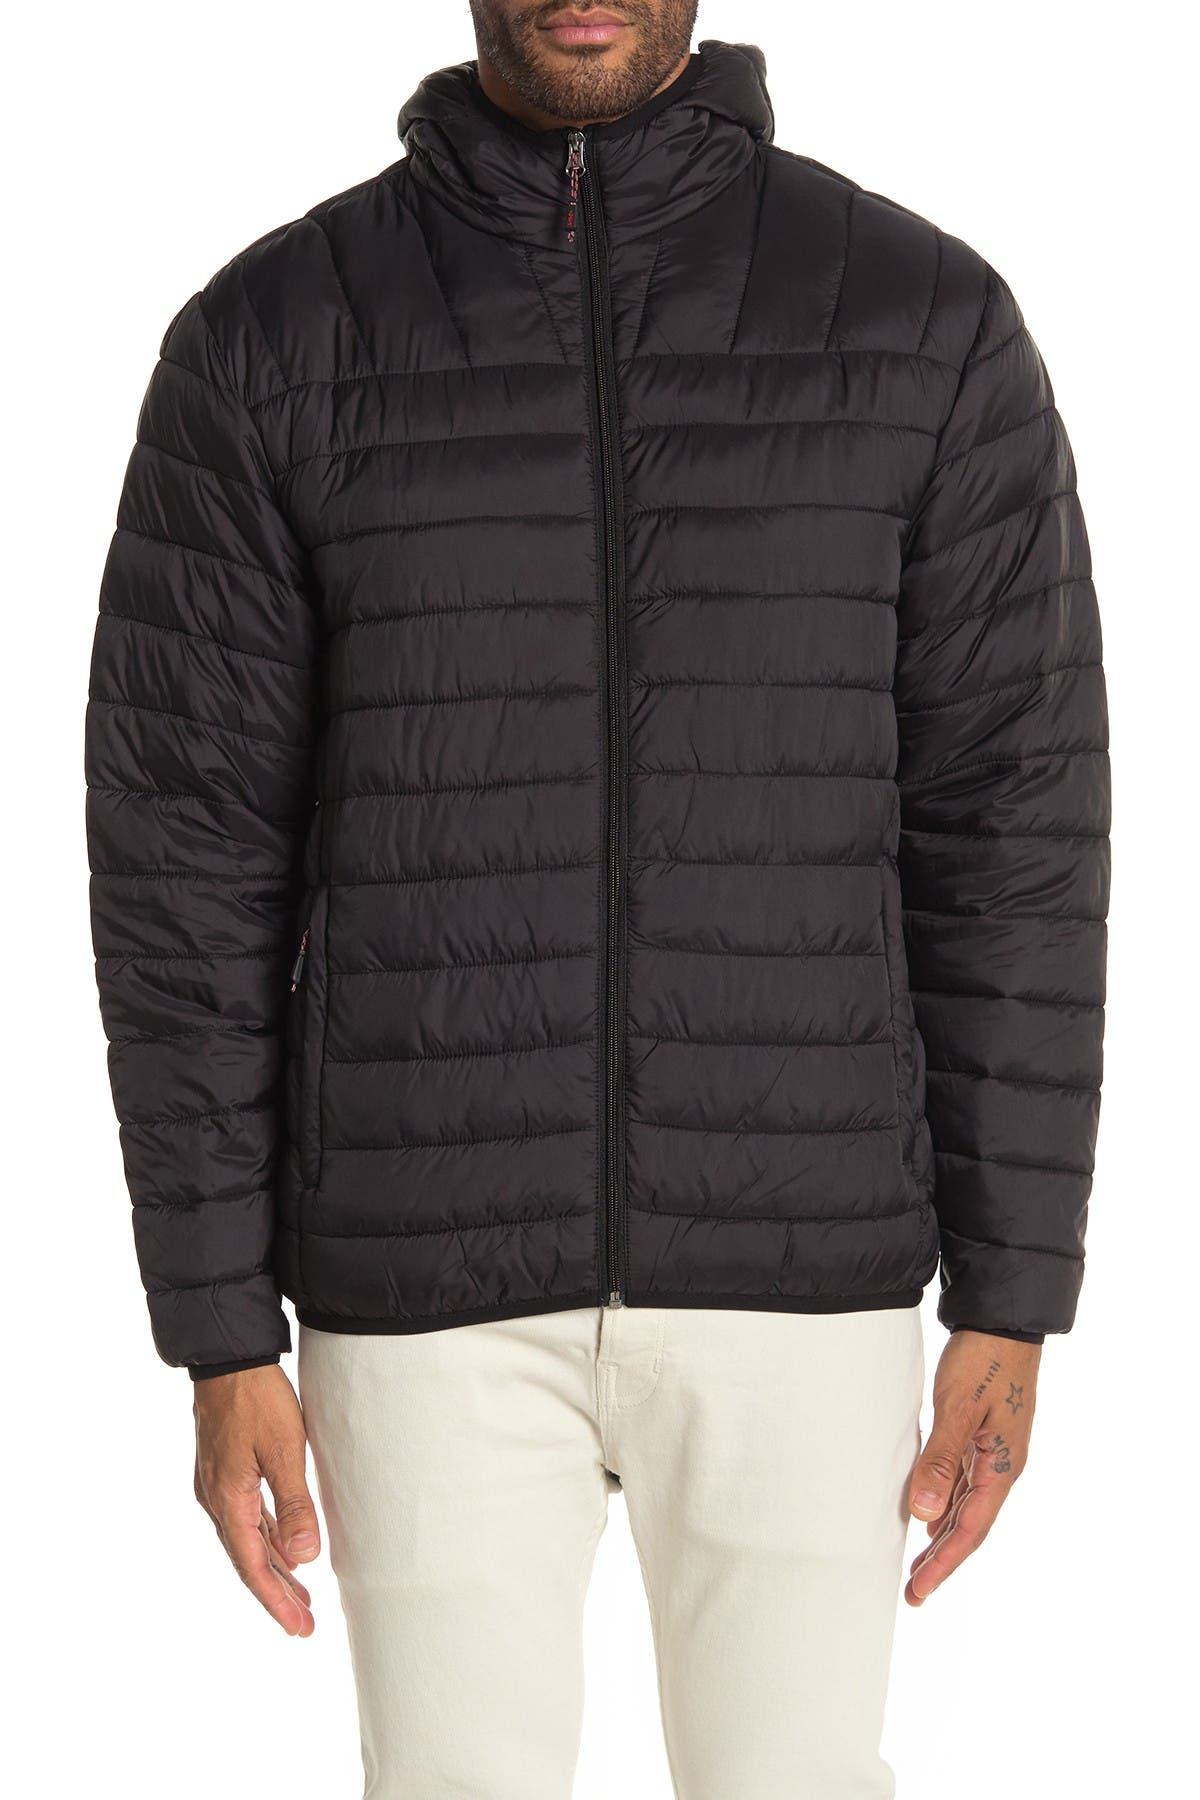 Hawke Co. Mens Packable メンズ Jacket Quilted